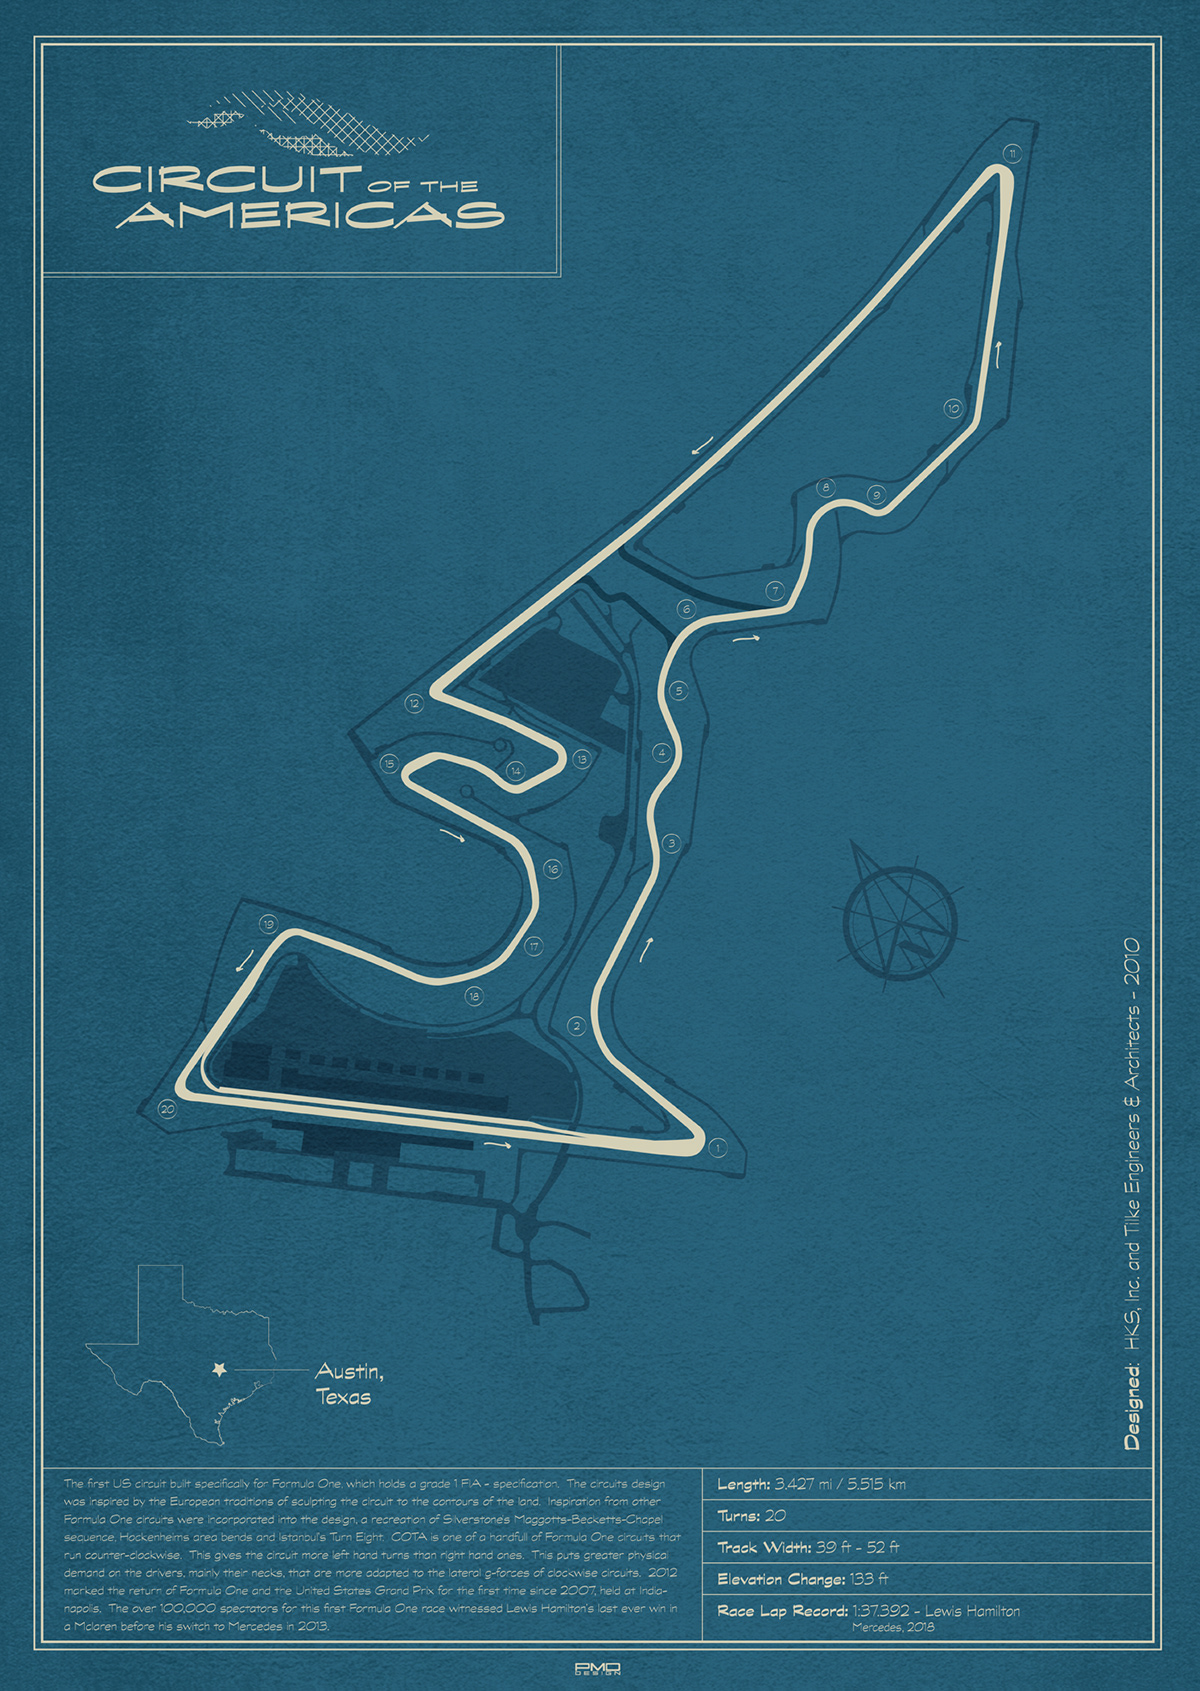 Blueprint ILLUSTRATION  map poster Race Circuit race track race track map Racing technical drawing vector